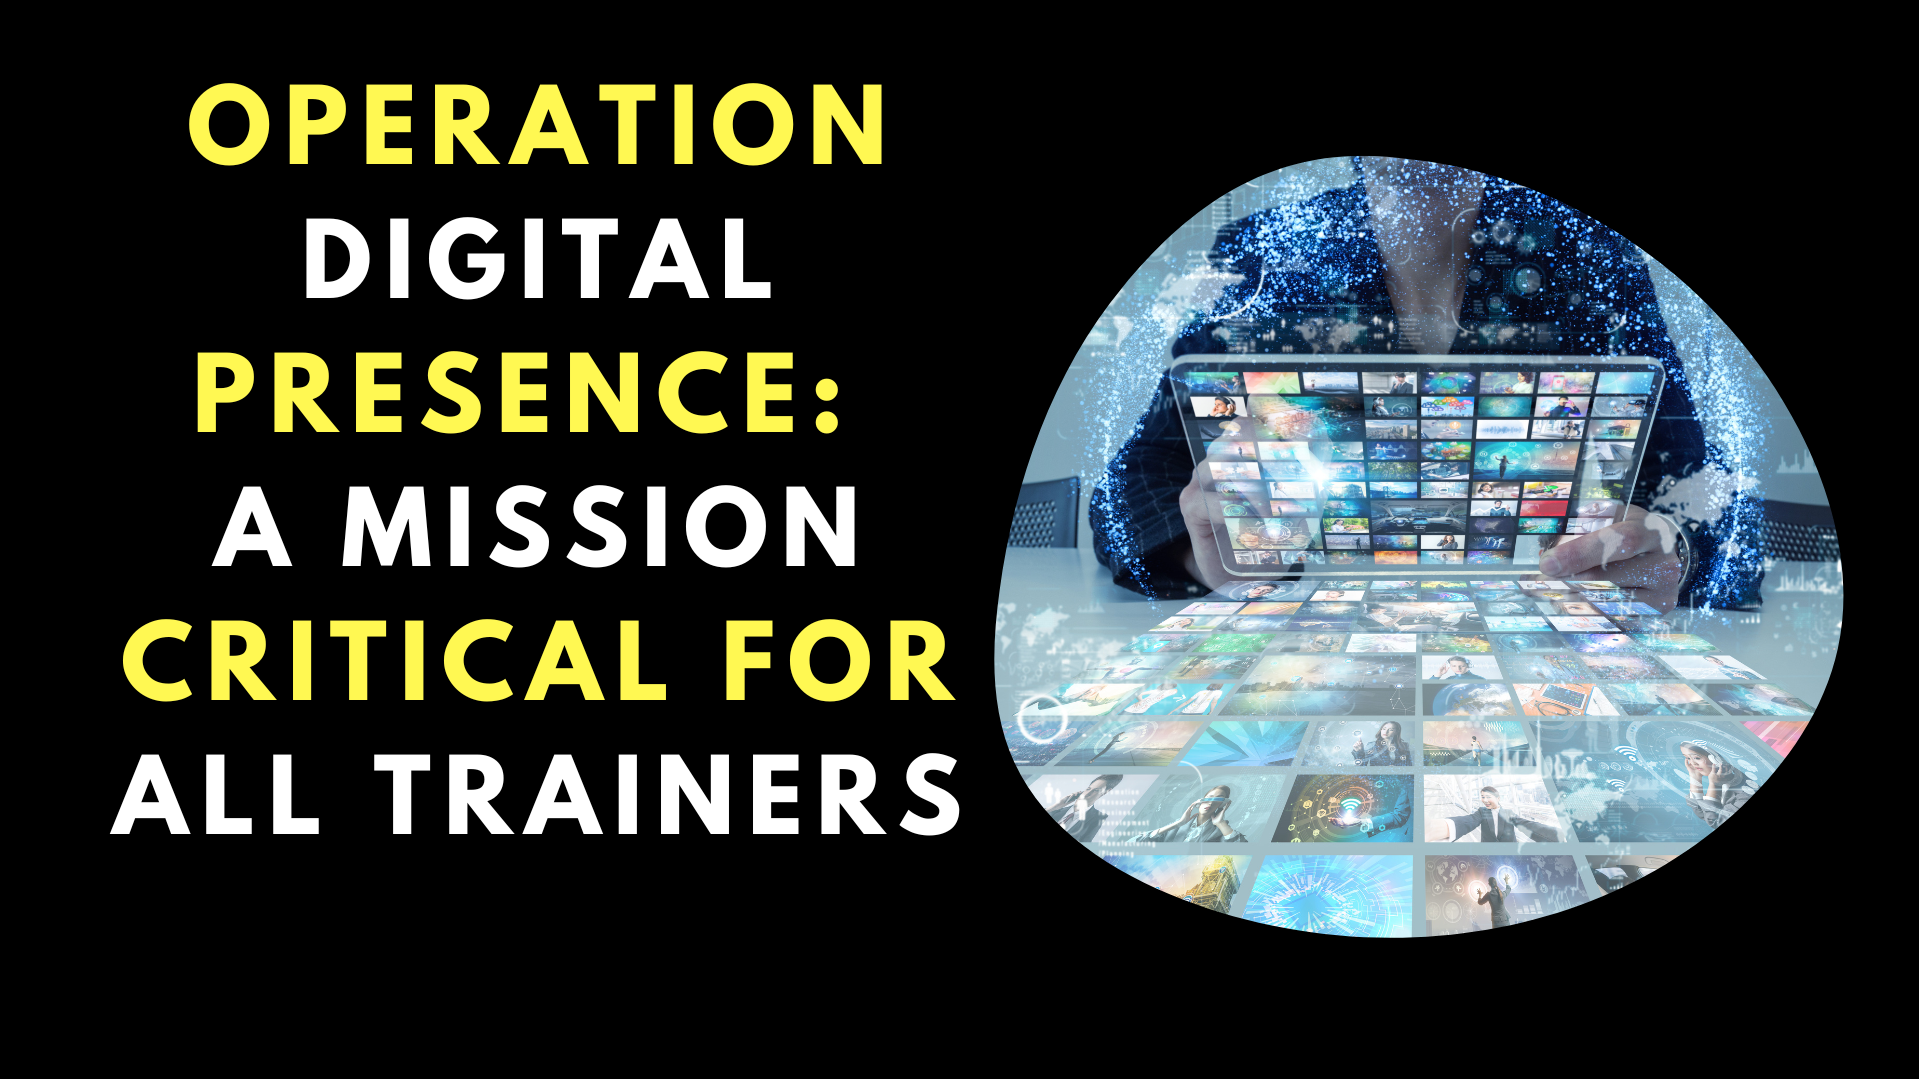 Operation Digital Presence: A Mission Critical For All Trainers